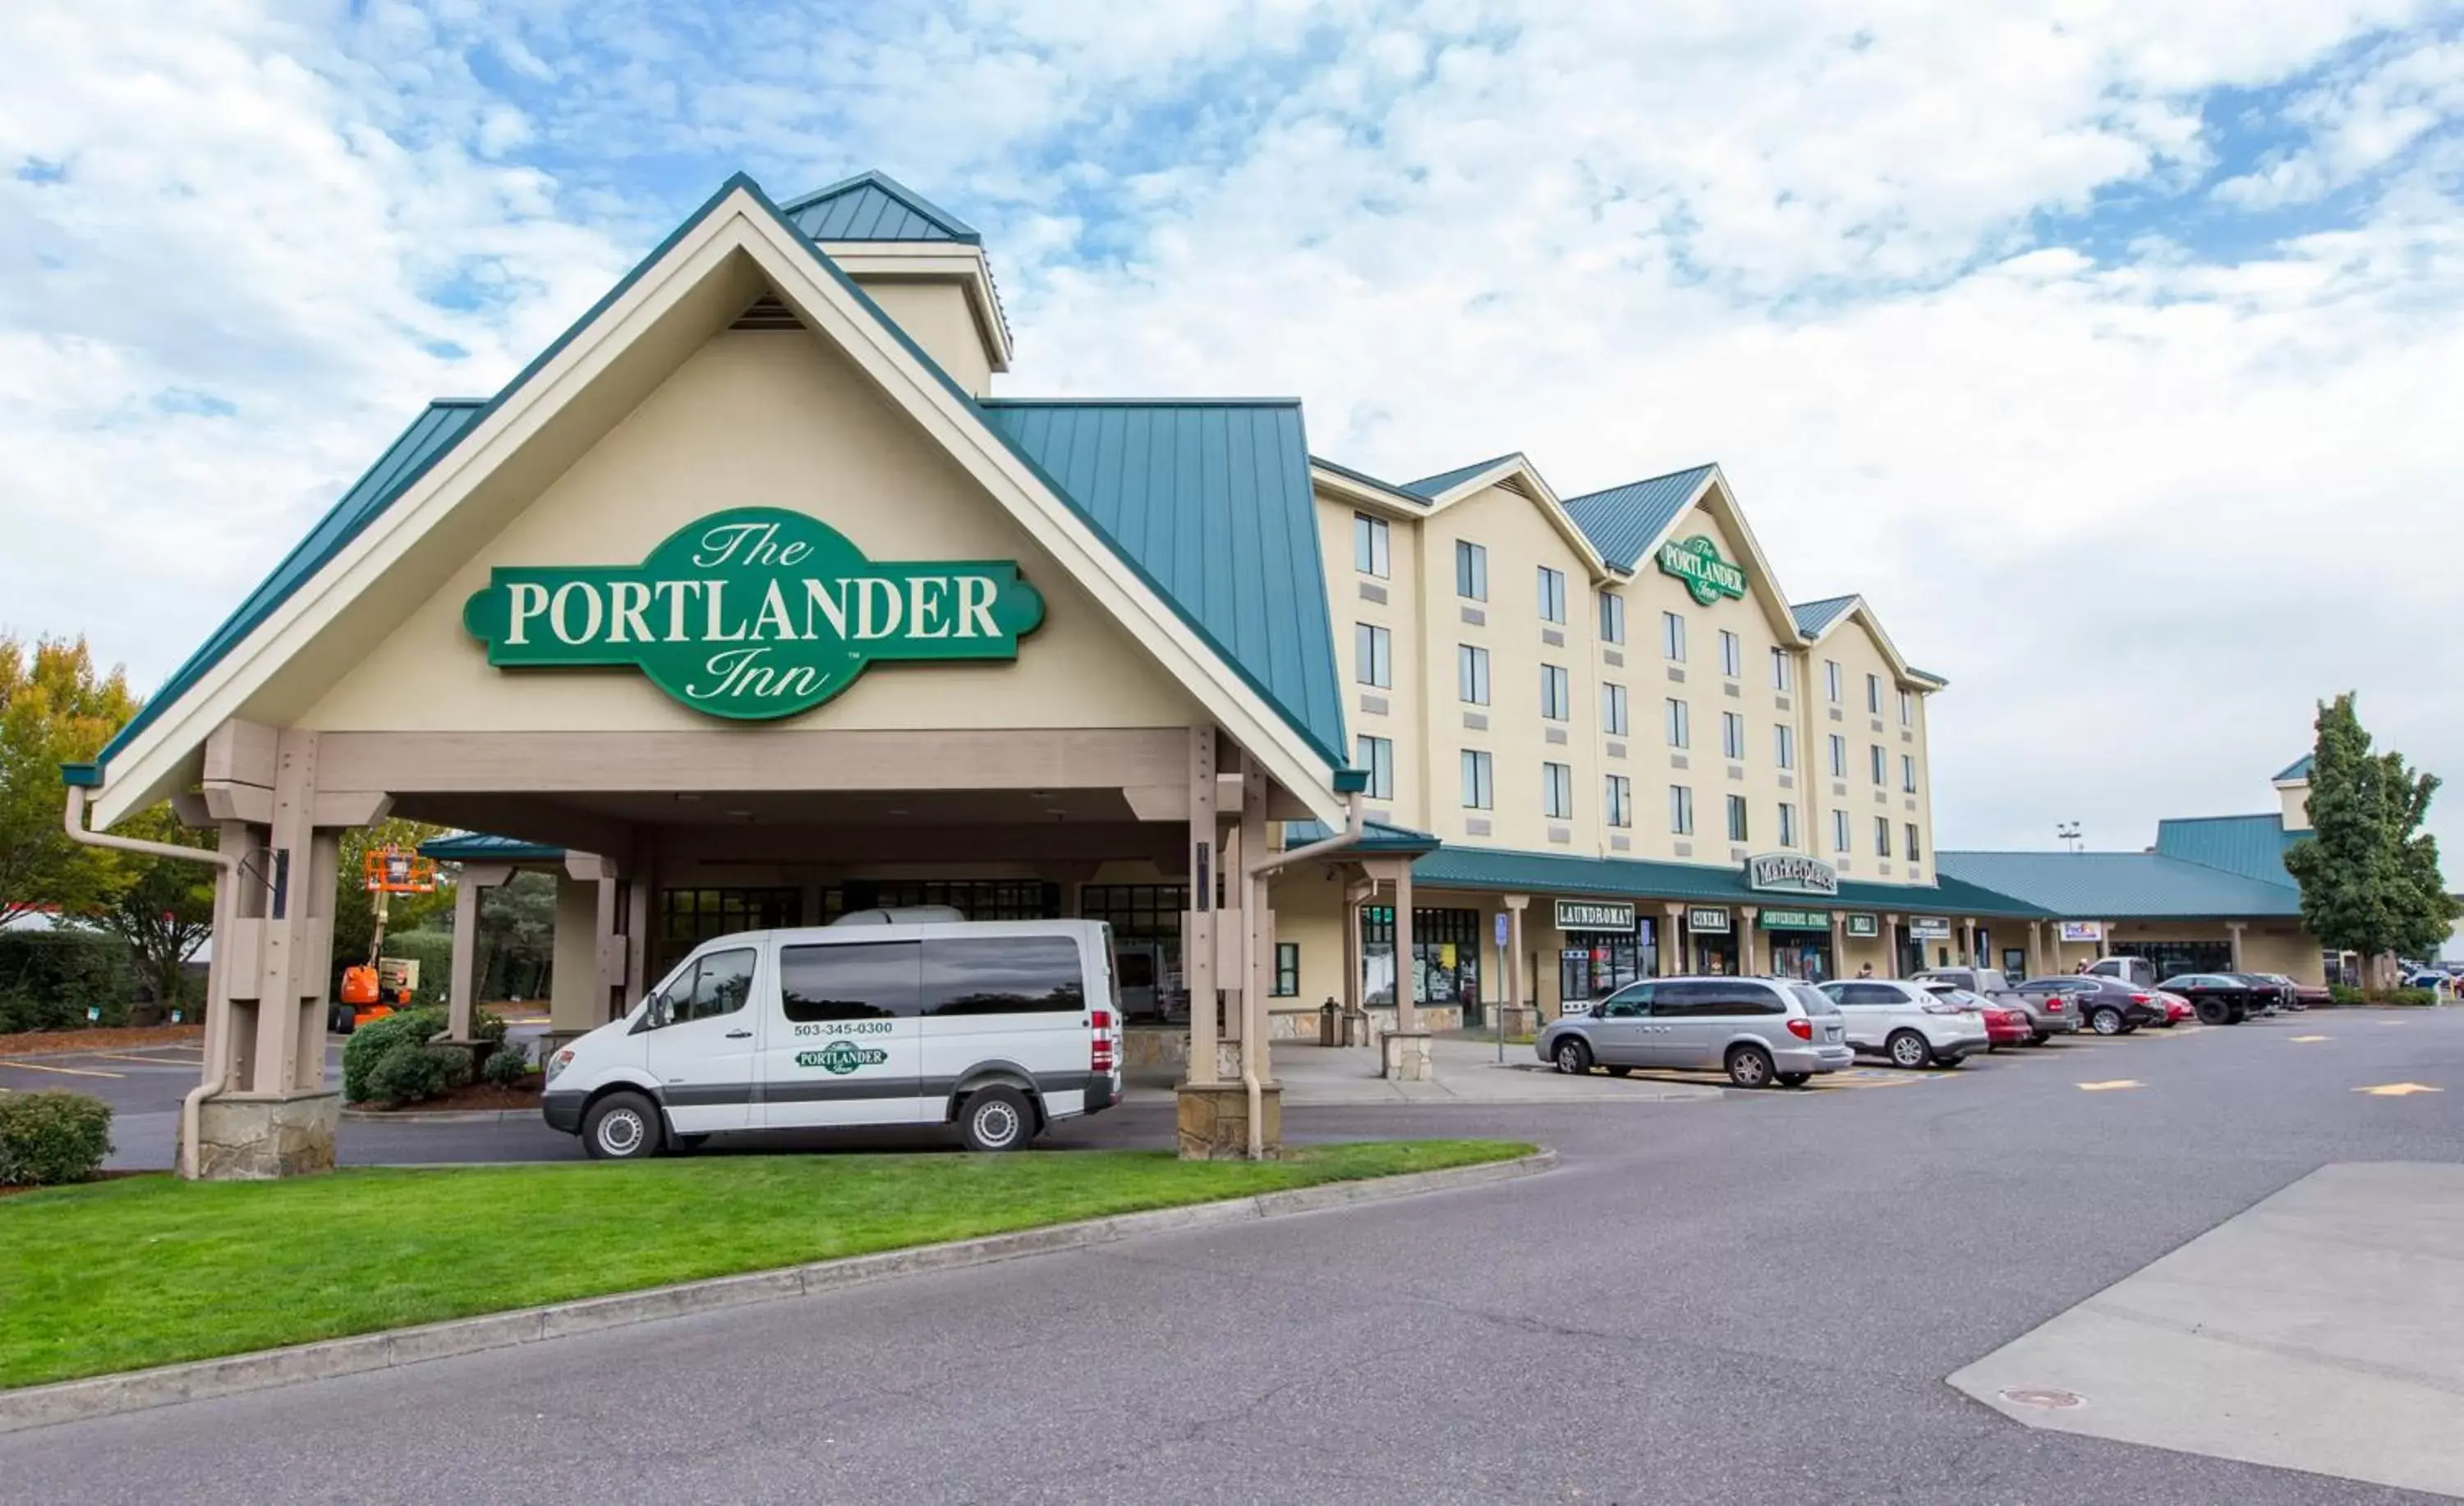 Property building in The Portlander Inn and Marketplace